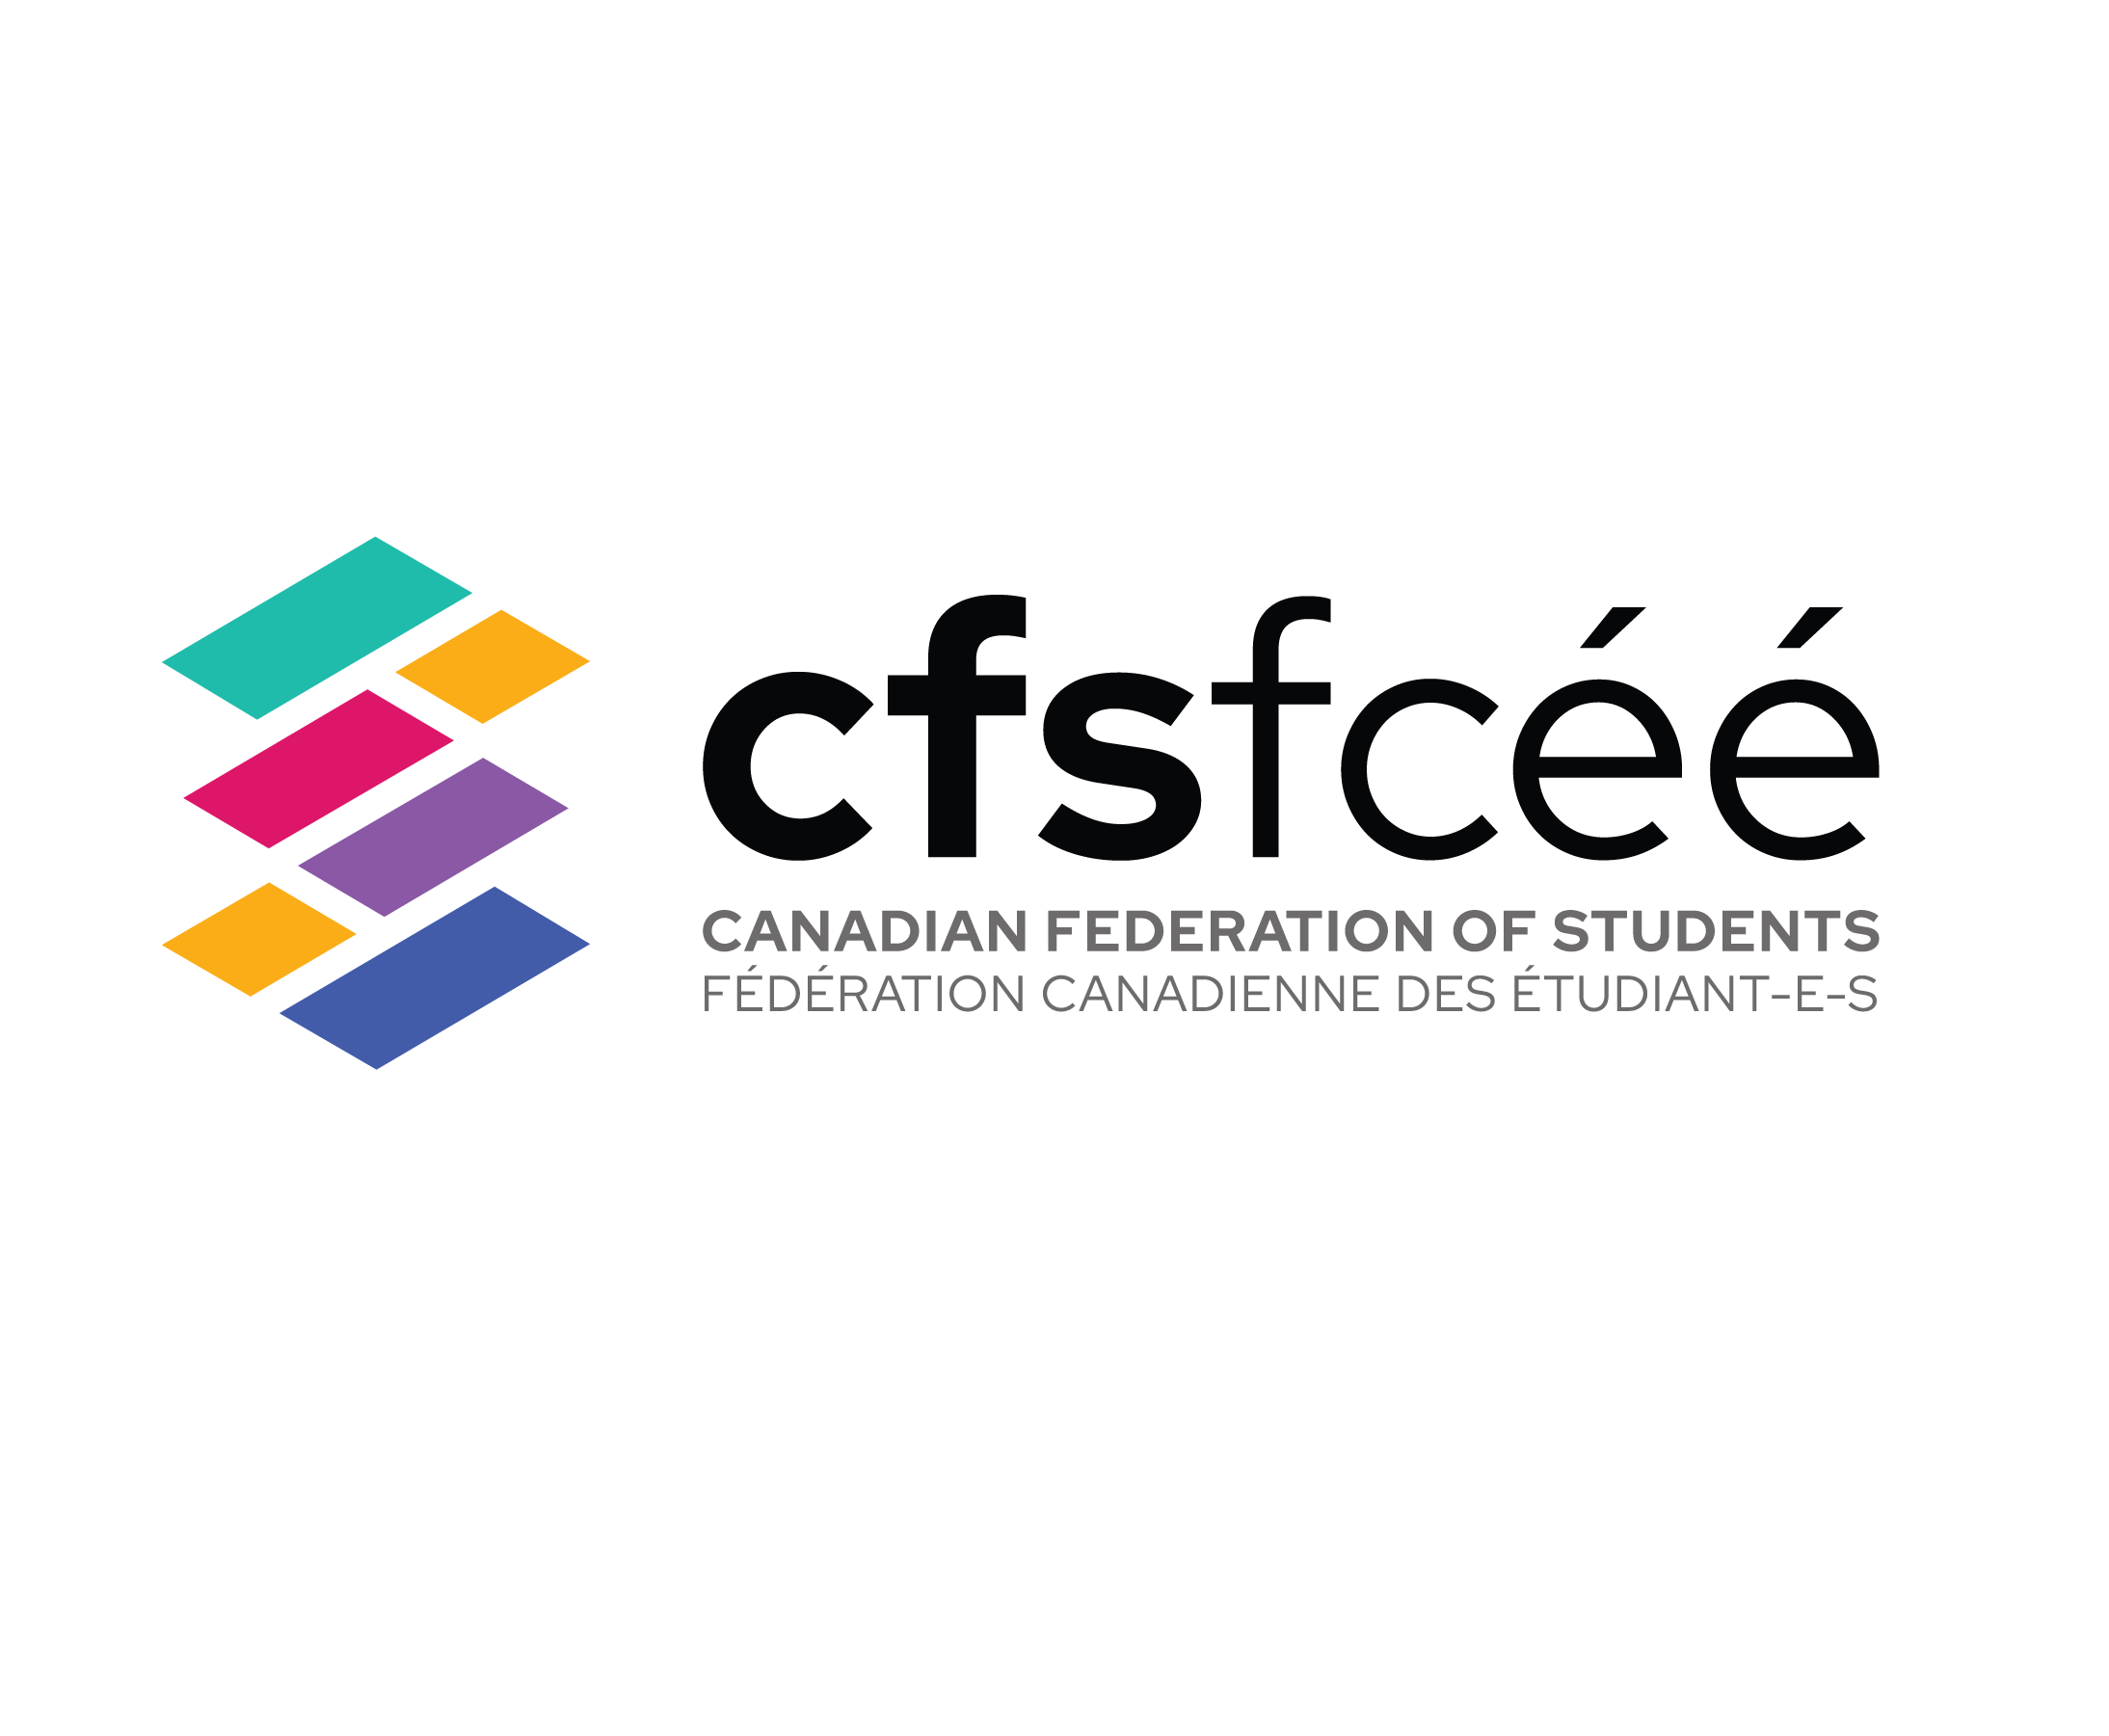 Canadian Federation of Students logo